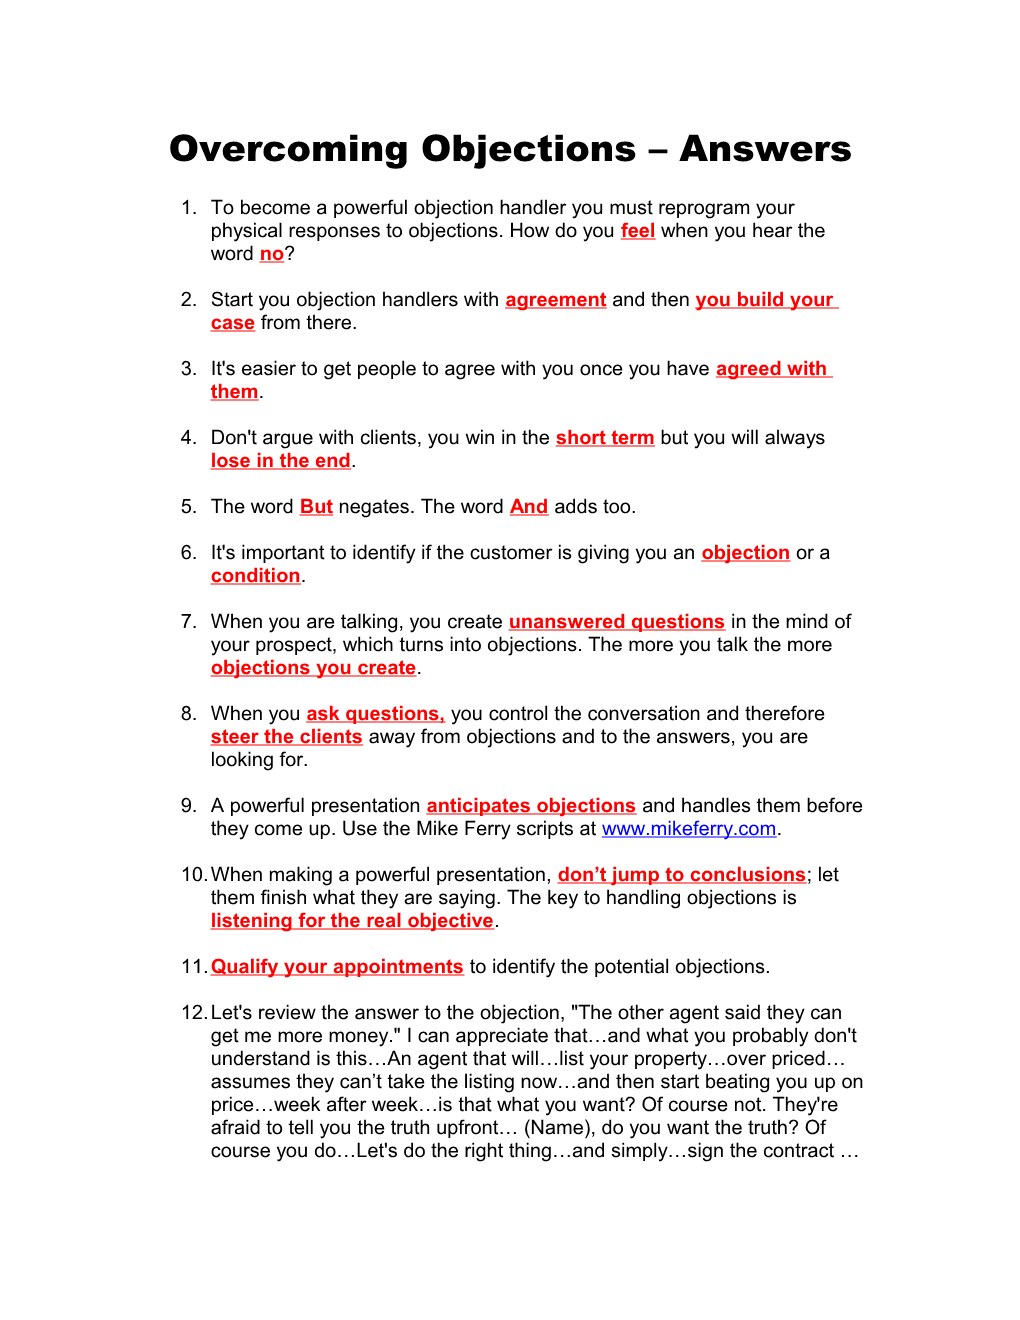 Overcoming Objections Answers